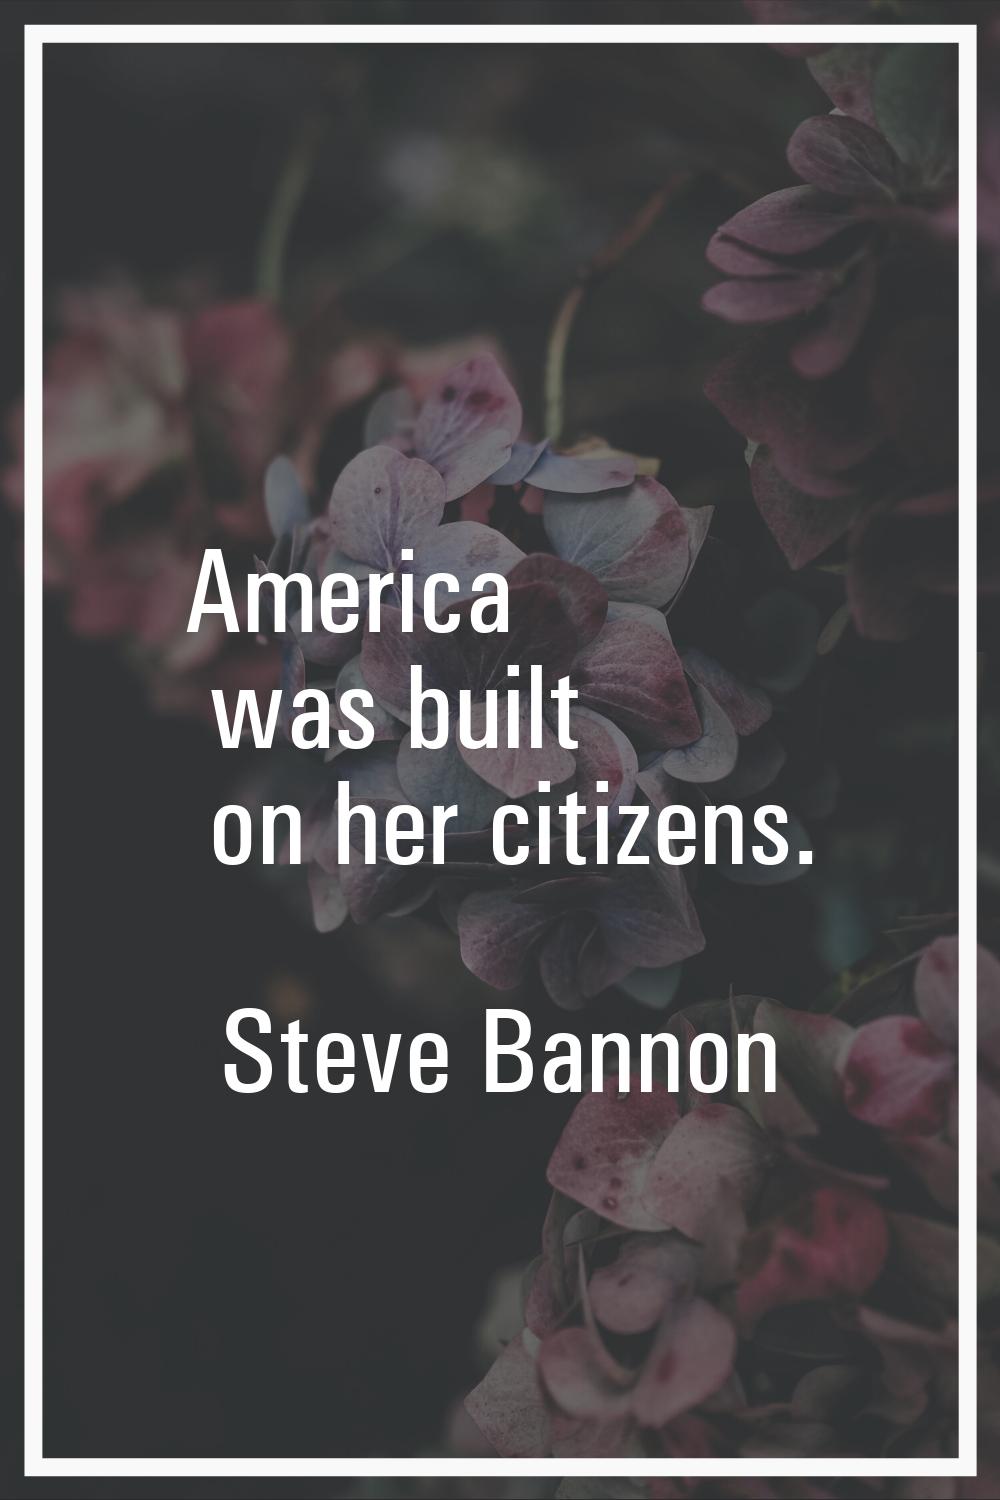 America was built on her citizens.